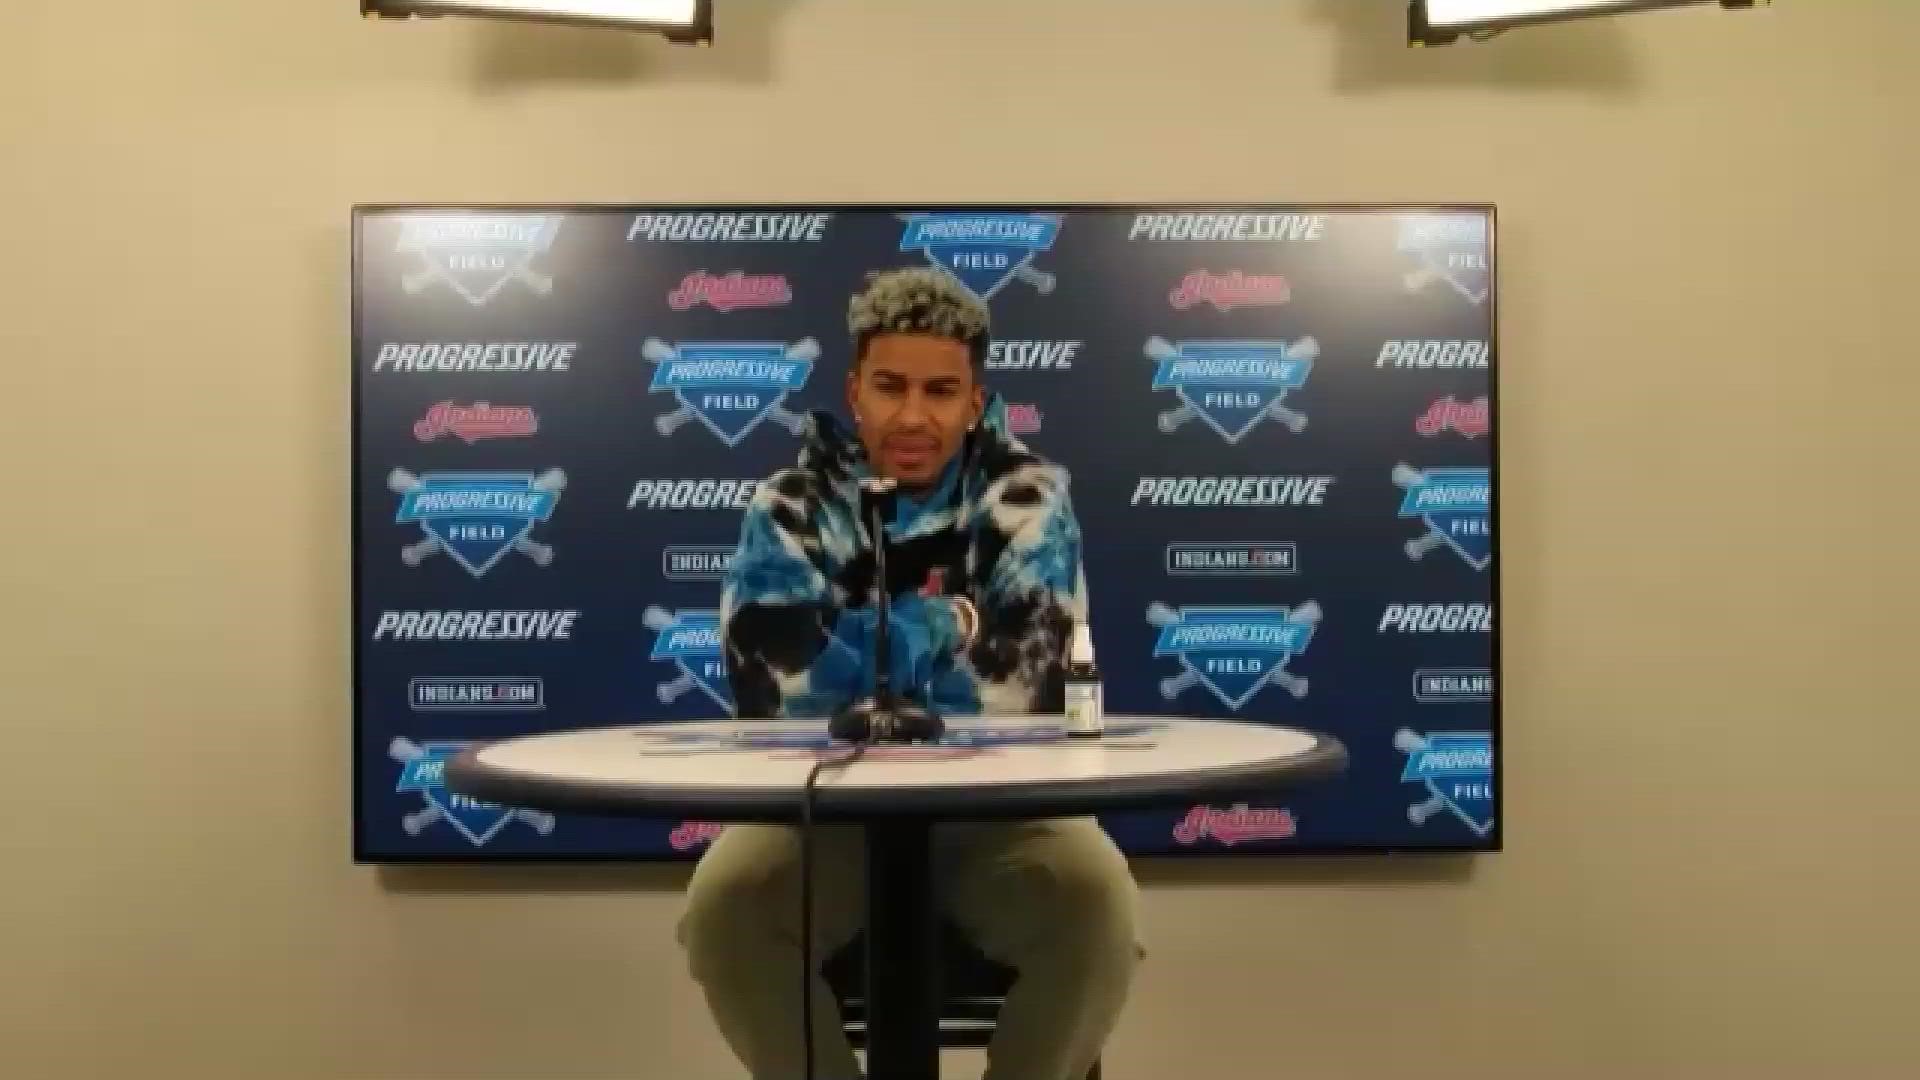 One day after the Cleveland Indians' 2020 season came to an end, Francisco Lindor discussed his future with the franchise.